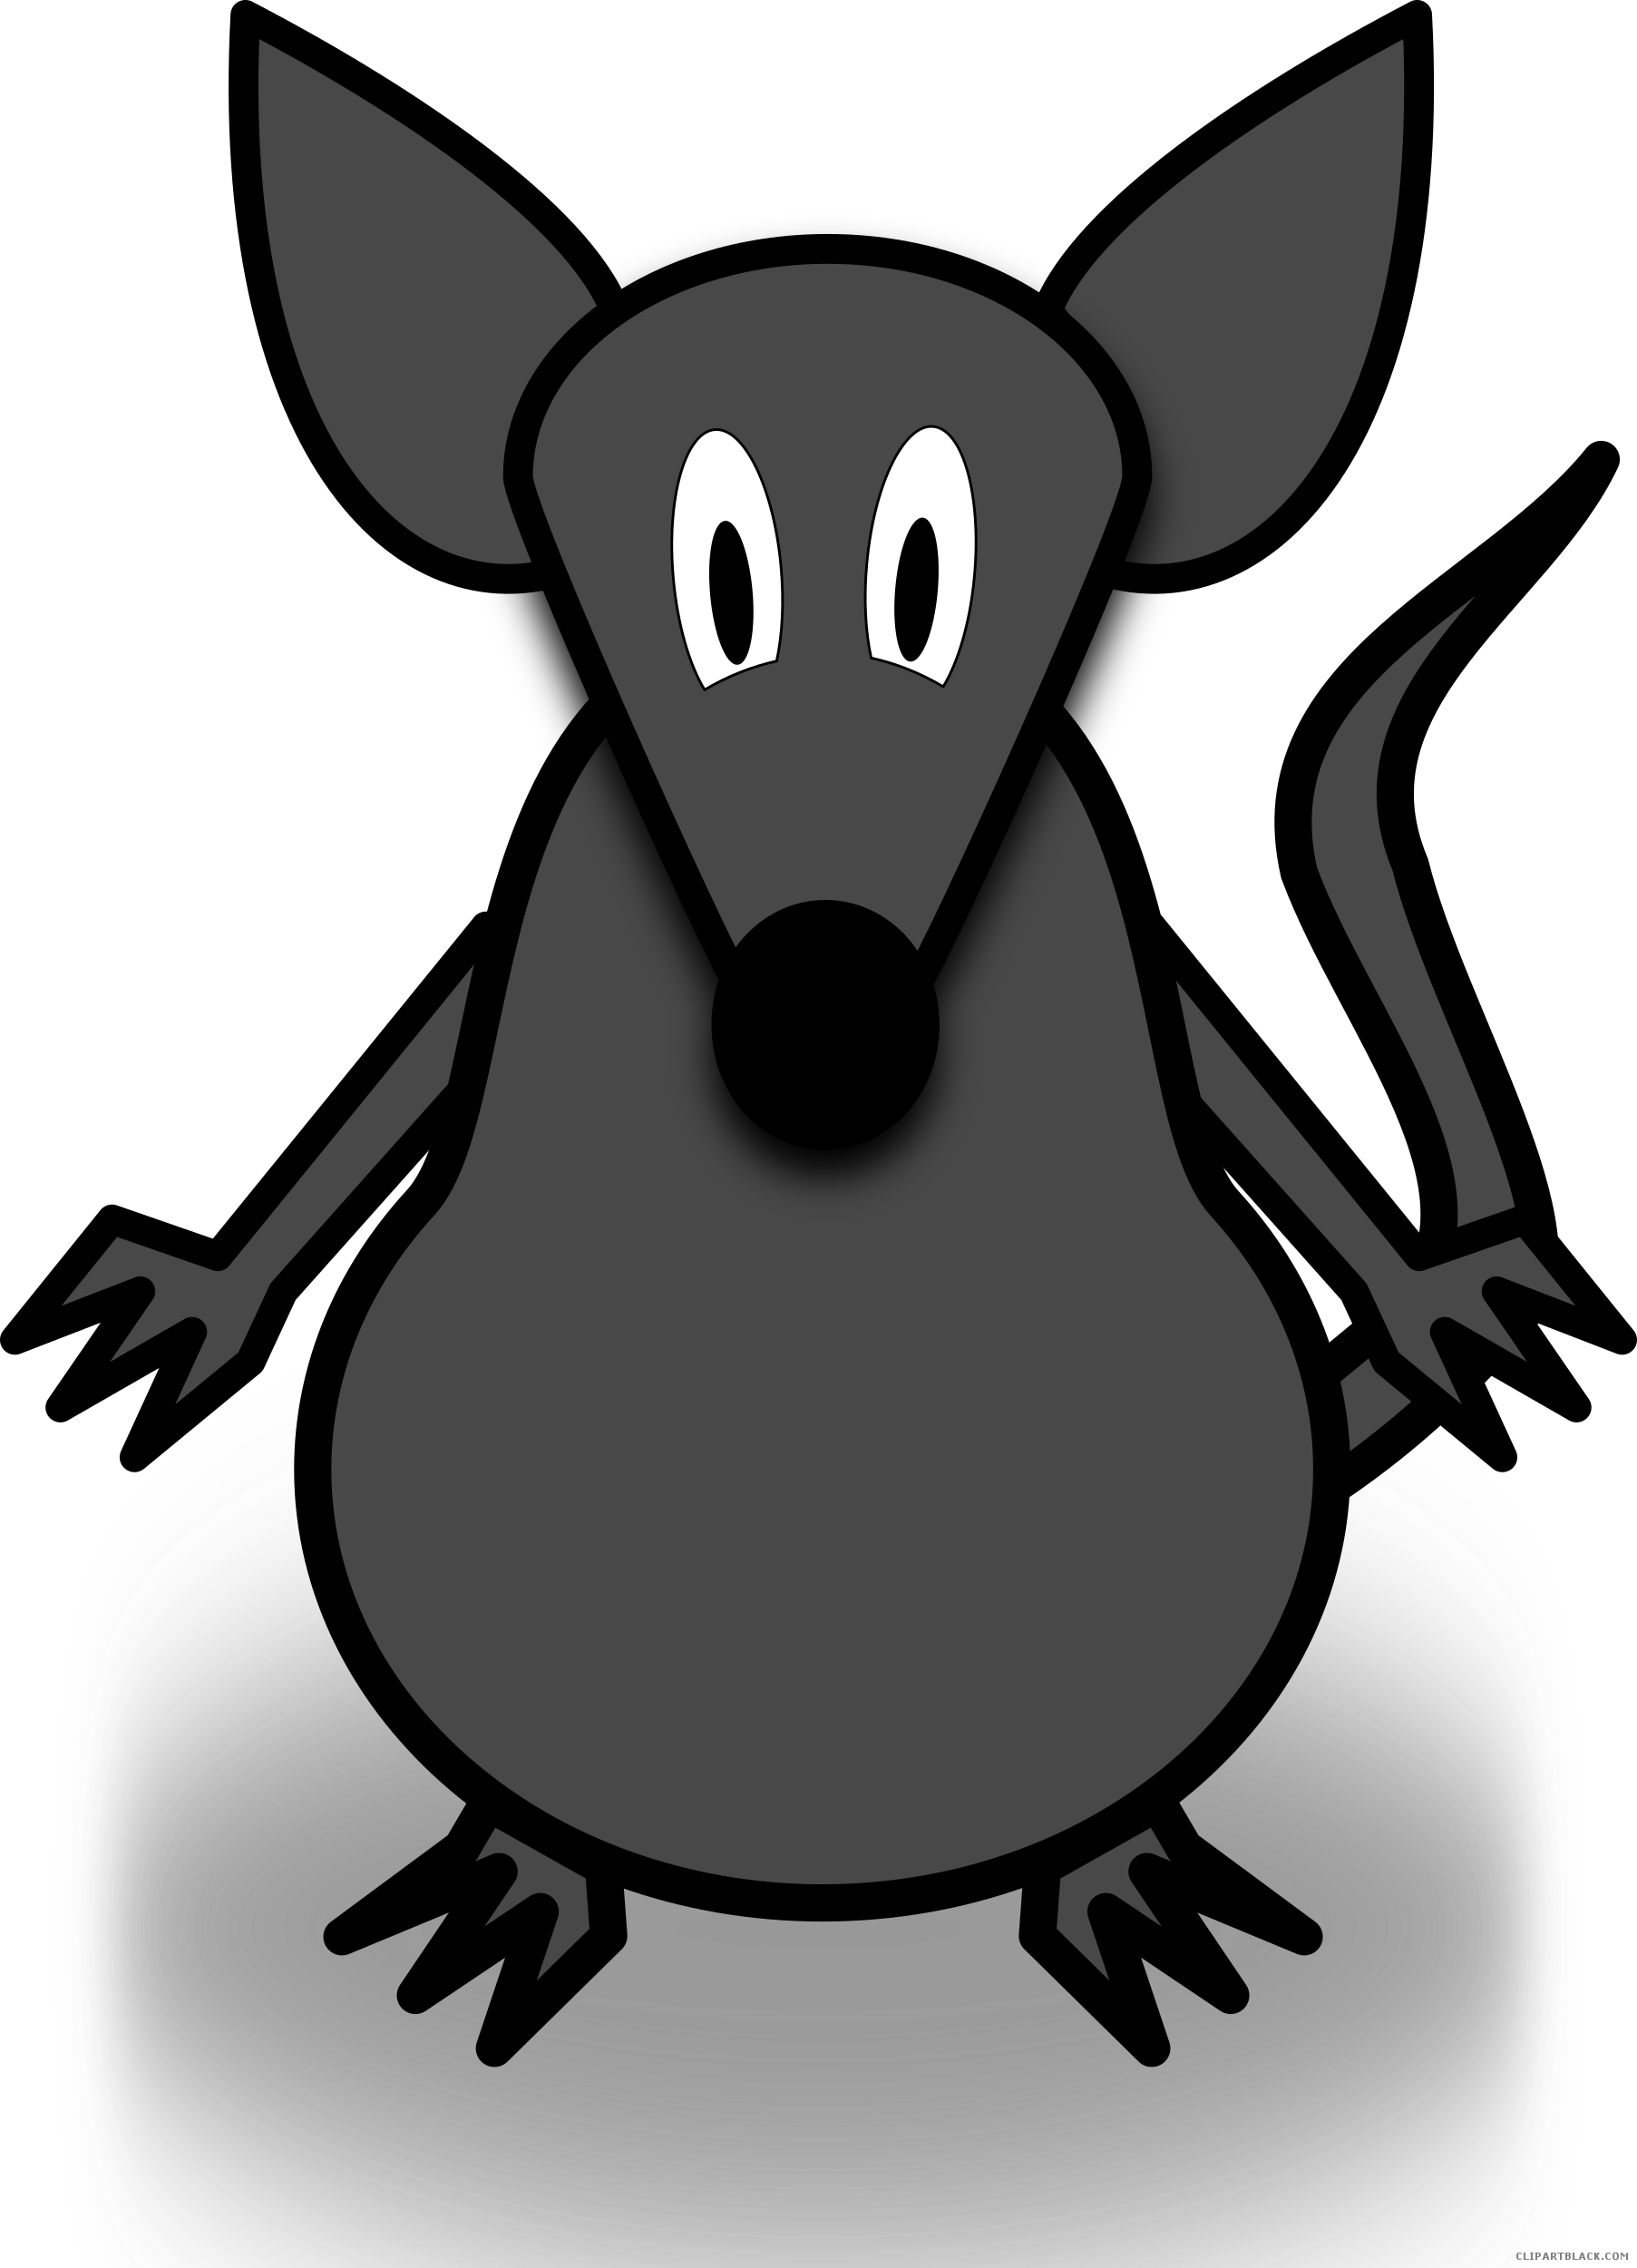 mouse clipart animal